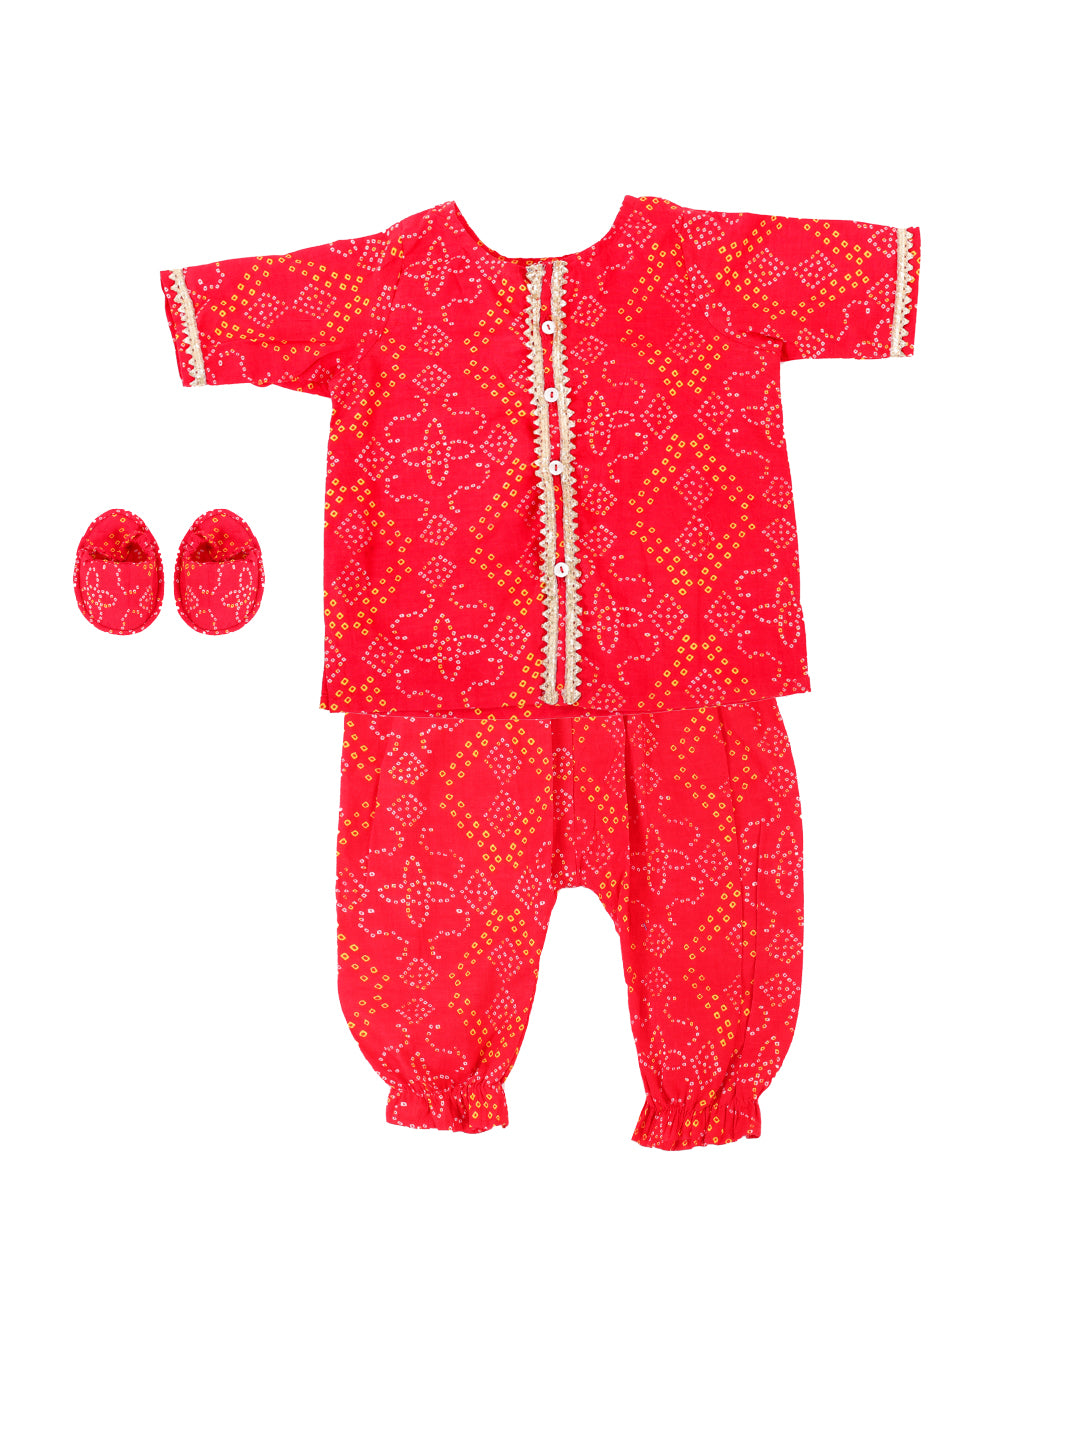 BownBee  Baby Girls Pure Cotton Top Harem with Headband and Booties  Infant Sets- Red